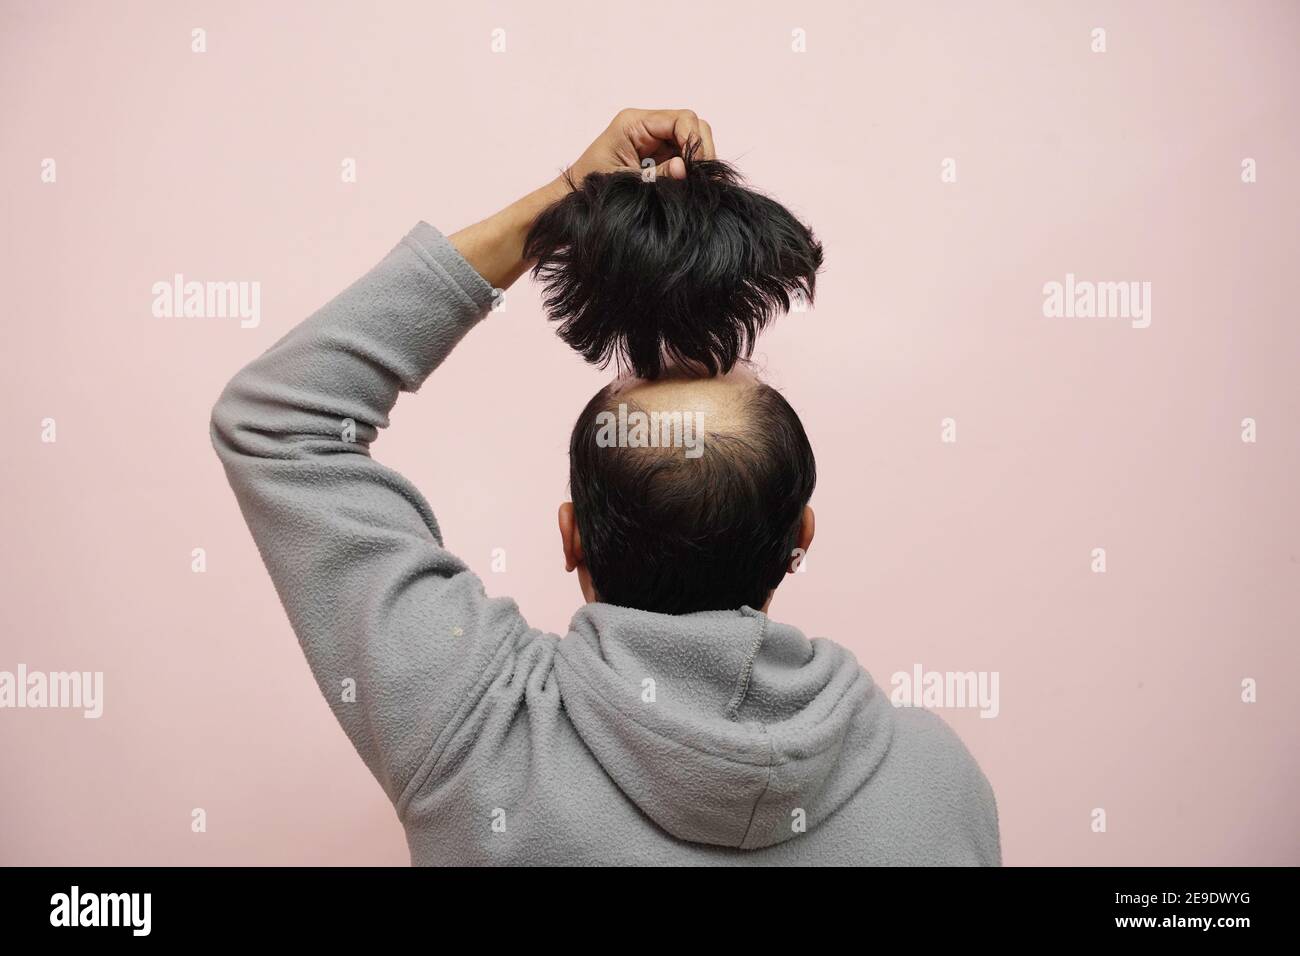 Closeup of a half-bald male removing his wig while wearing a hoodie with a pink background Stock Photo